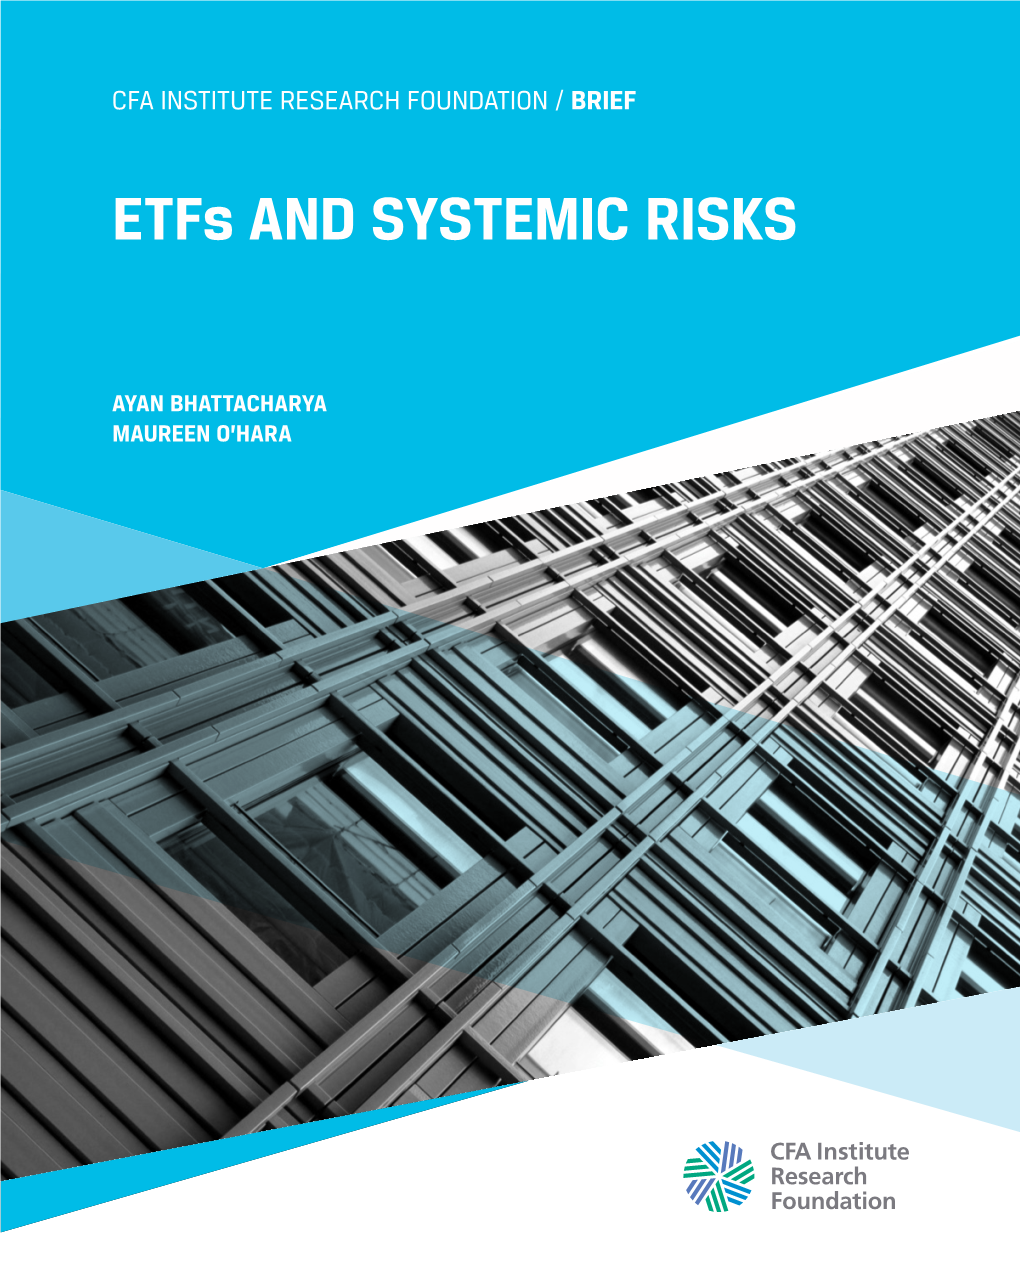 Etfs and SYSTEMIC RISKS